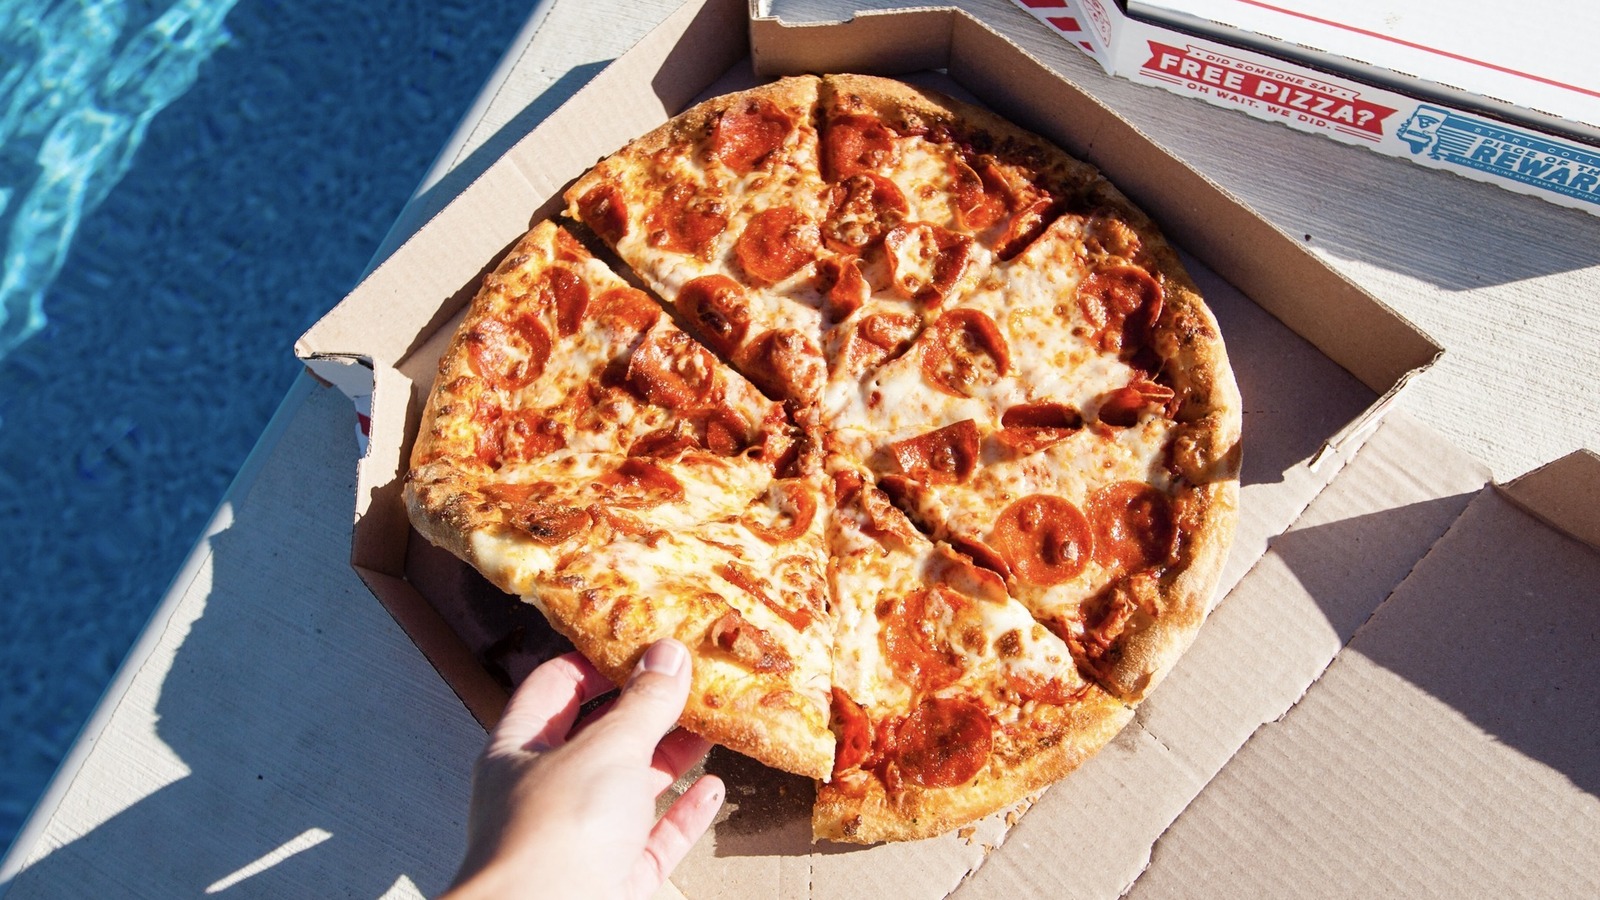 Domino’s Is Now Officially On Uber Eats And Postmates – The Daily Meal